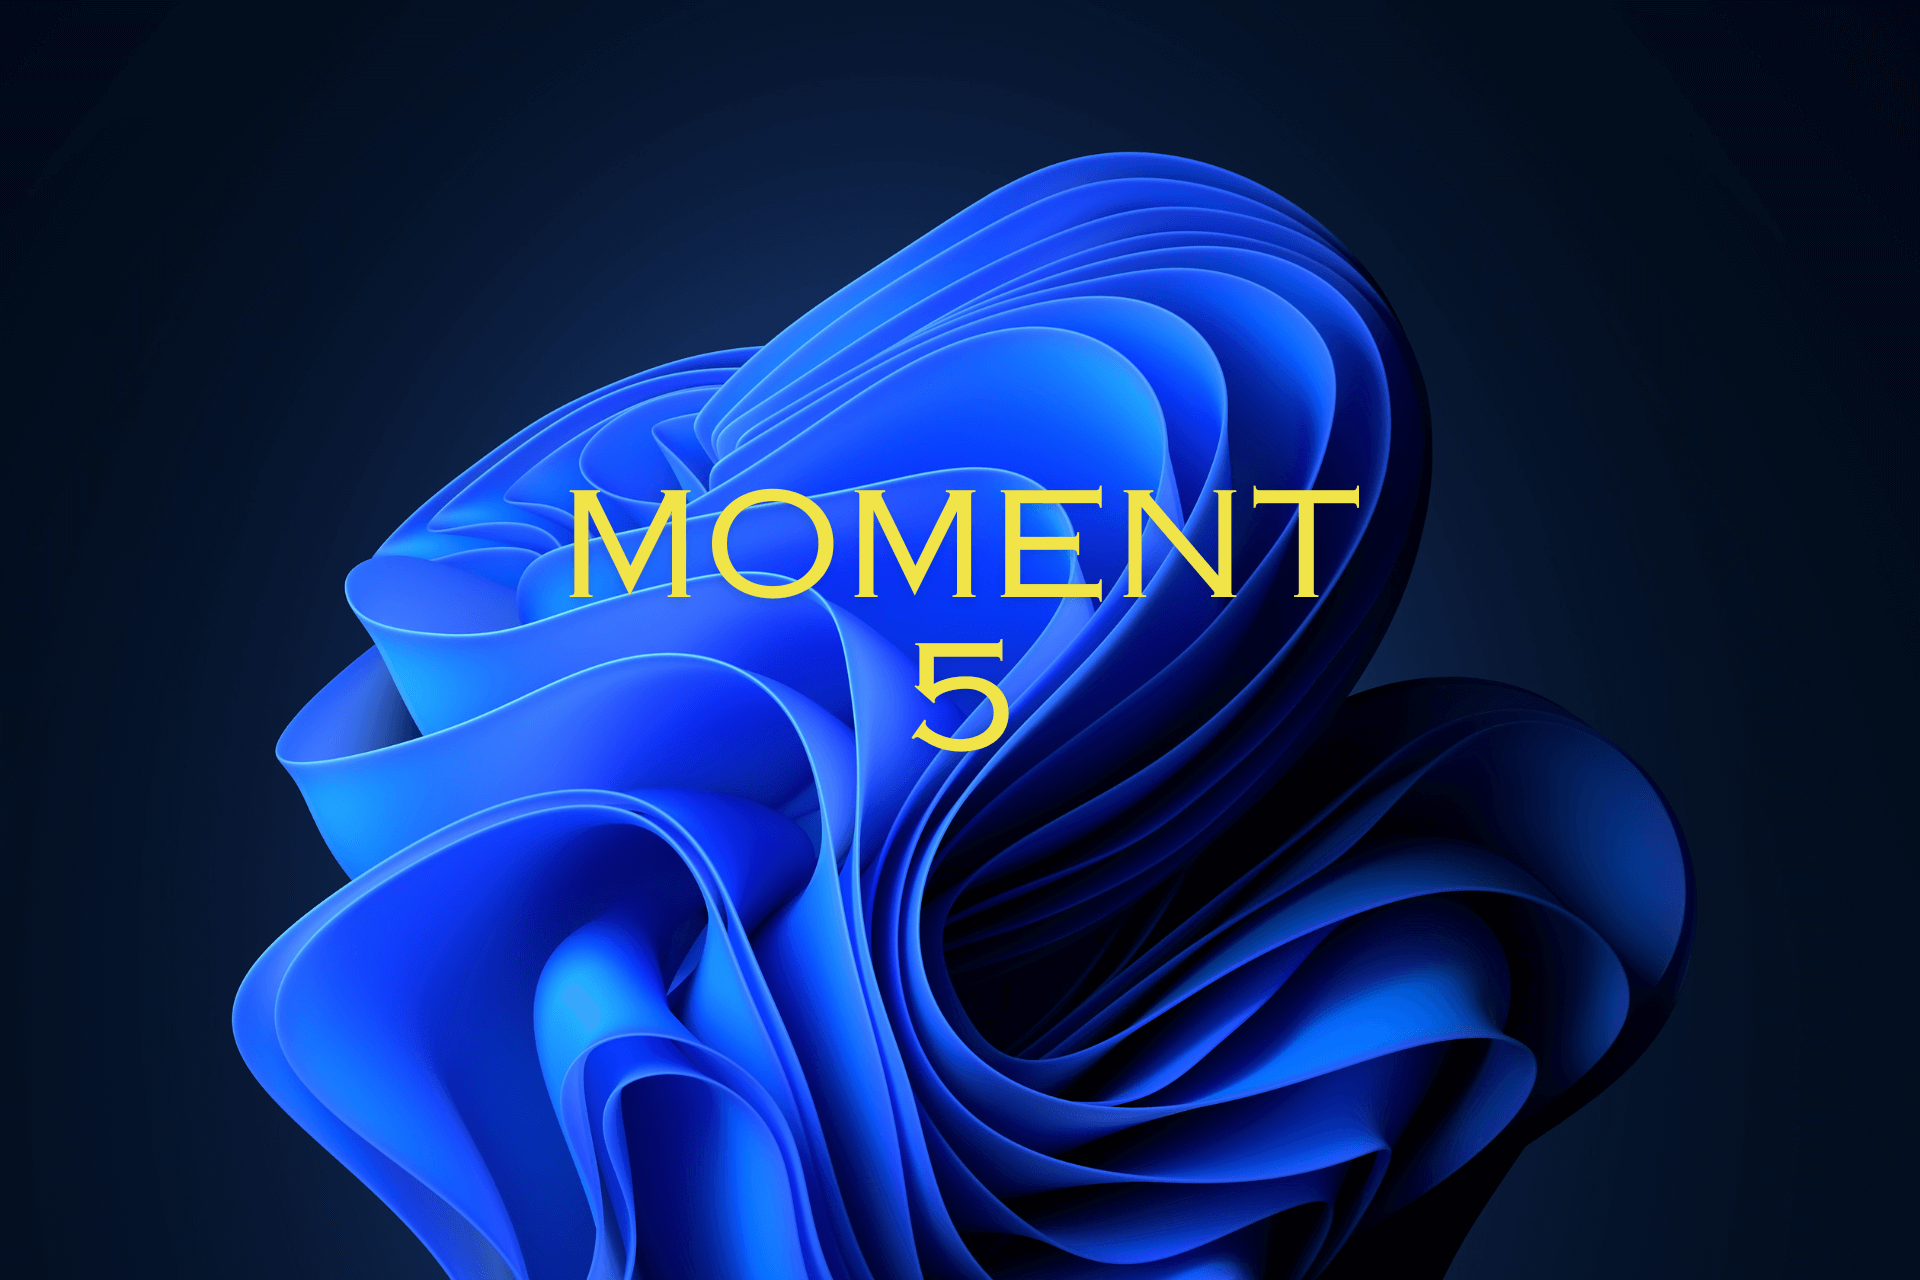 Moment 5 will now be available to all Windows 11 users